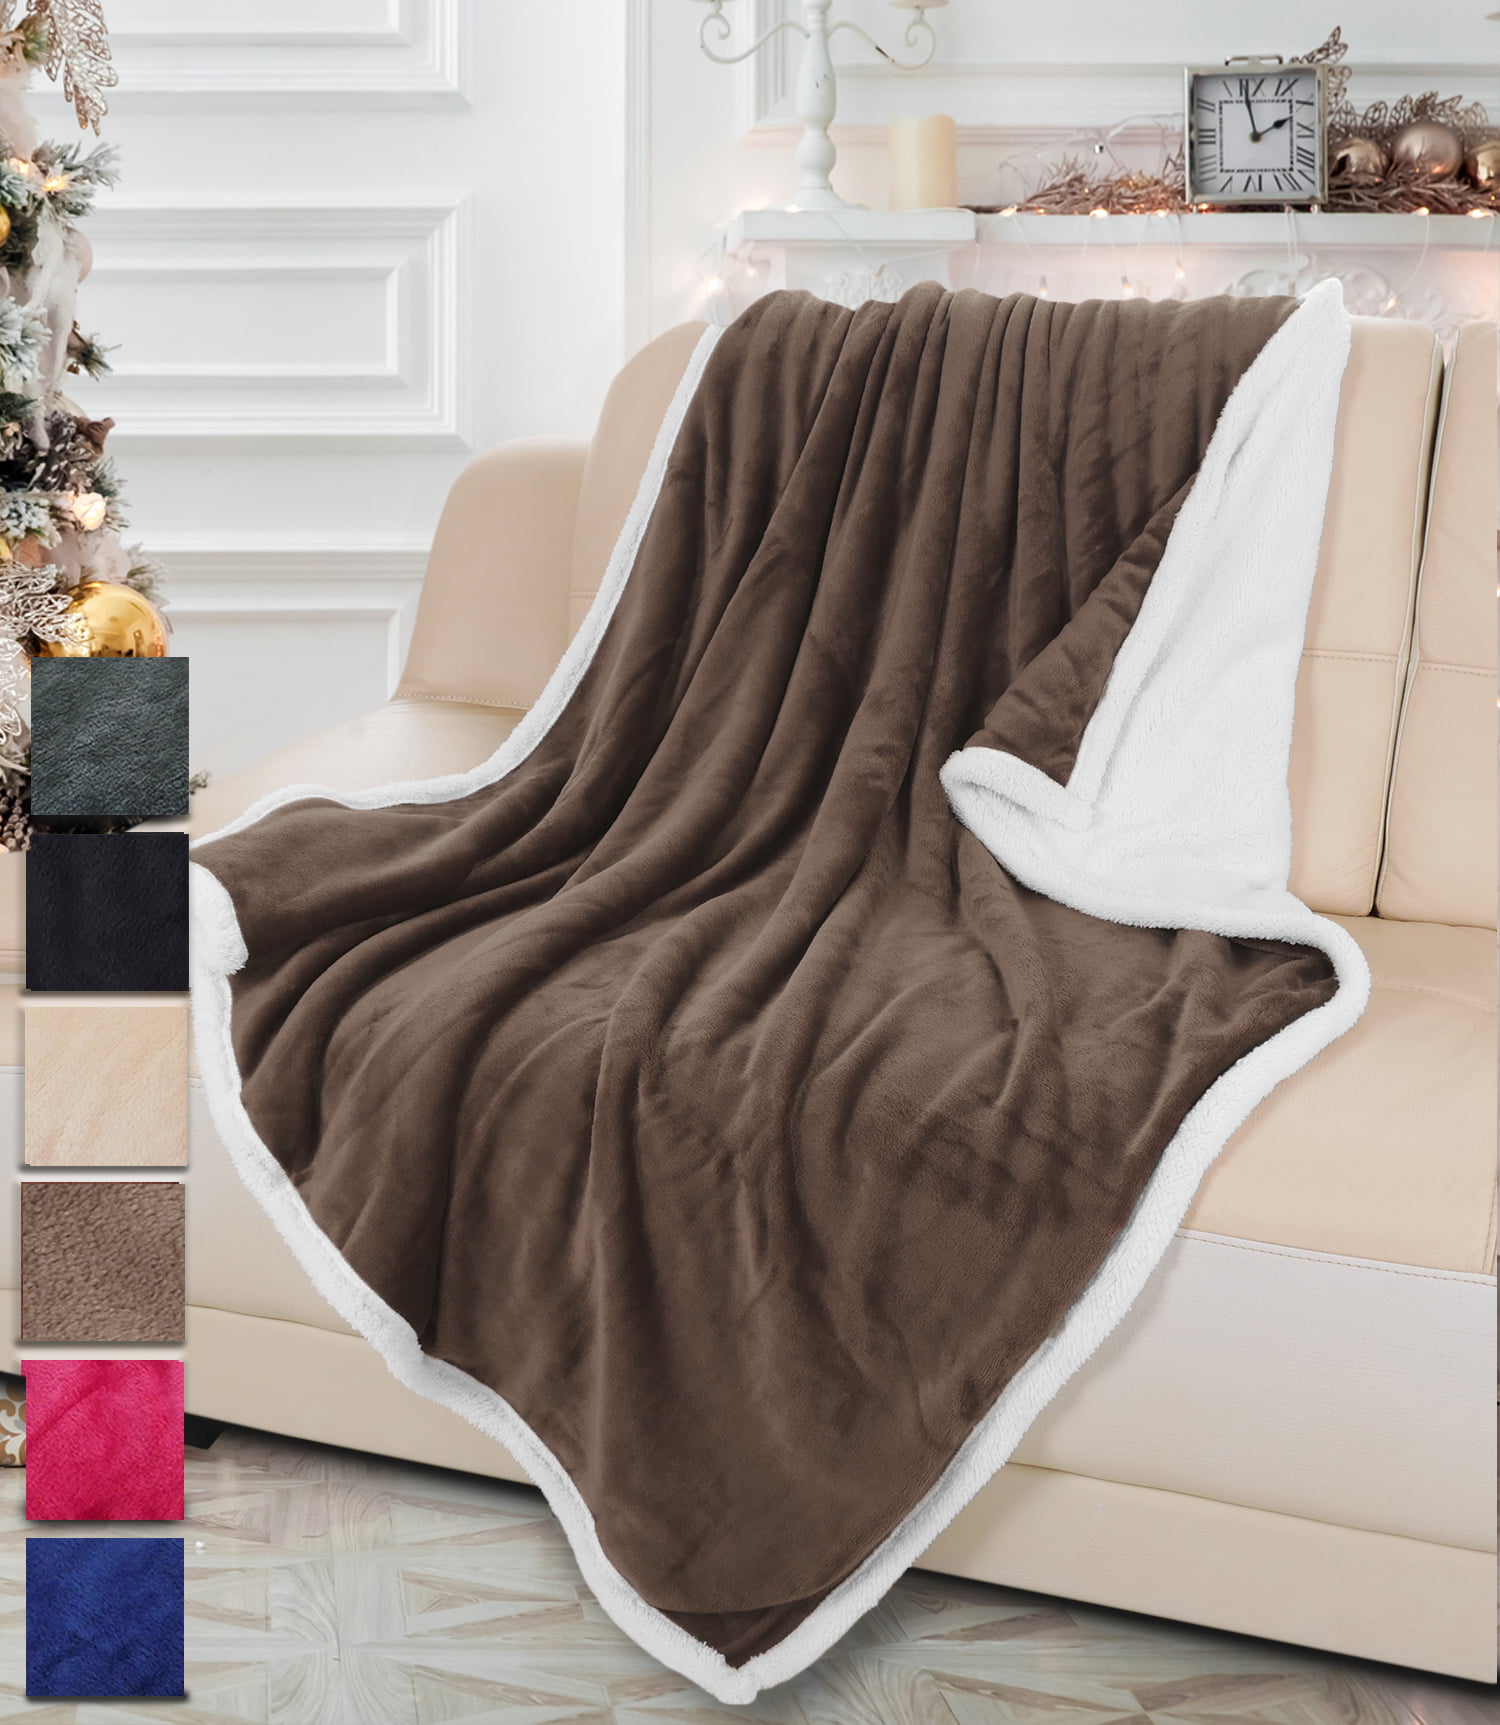 Sherpa Fleece Bedding Blanket Nurse Themed Double-Sided Super Sherpa Fleece Throw Blanket for Home Sofa Bed Travelling Camping by Oclot 150 x 200cm/130 x 150cm